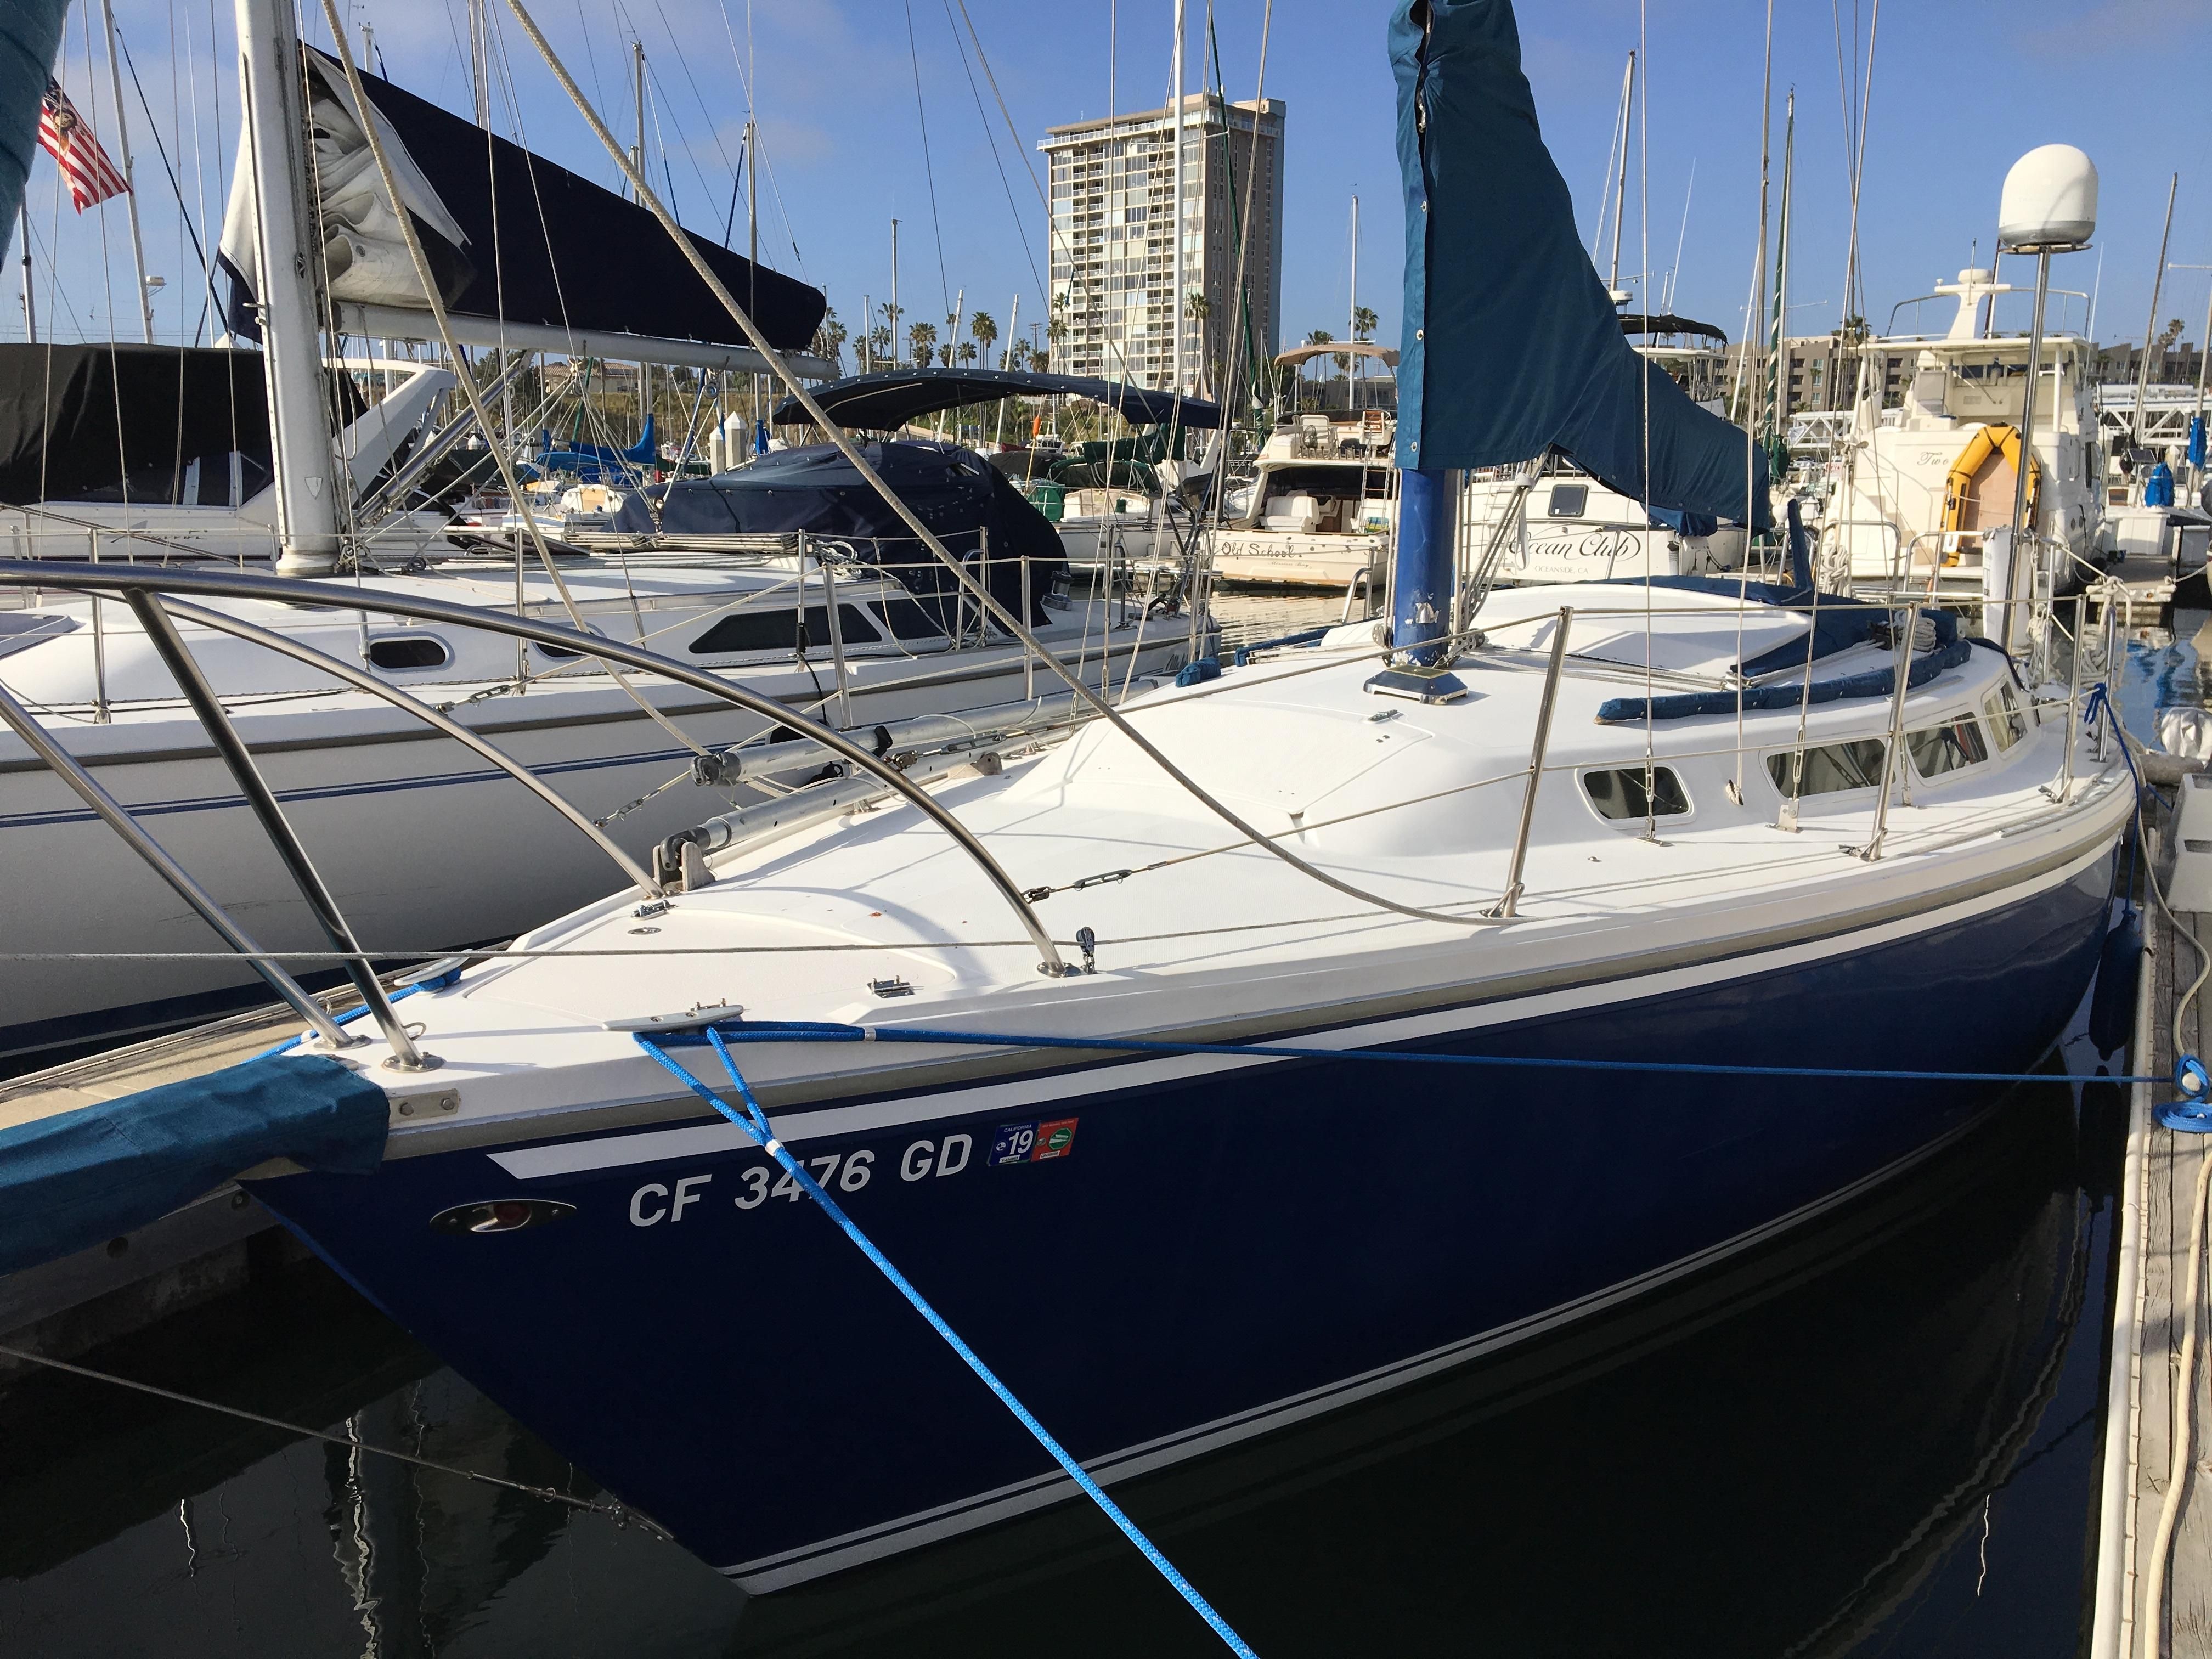 30 catalina sailboat for sale